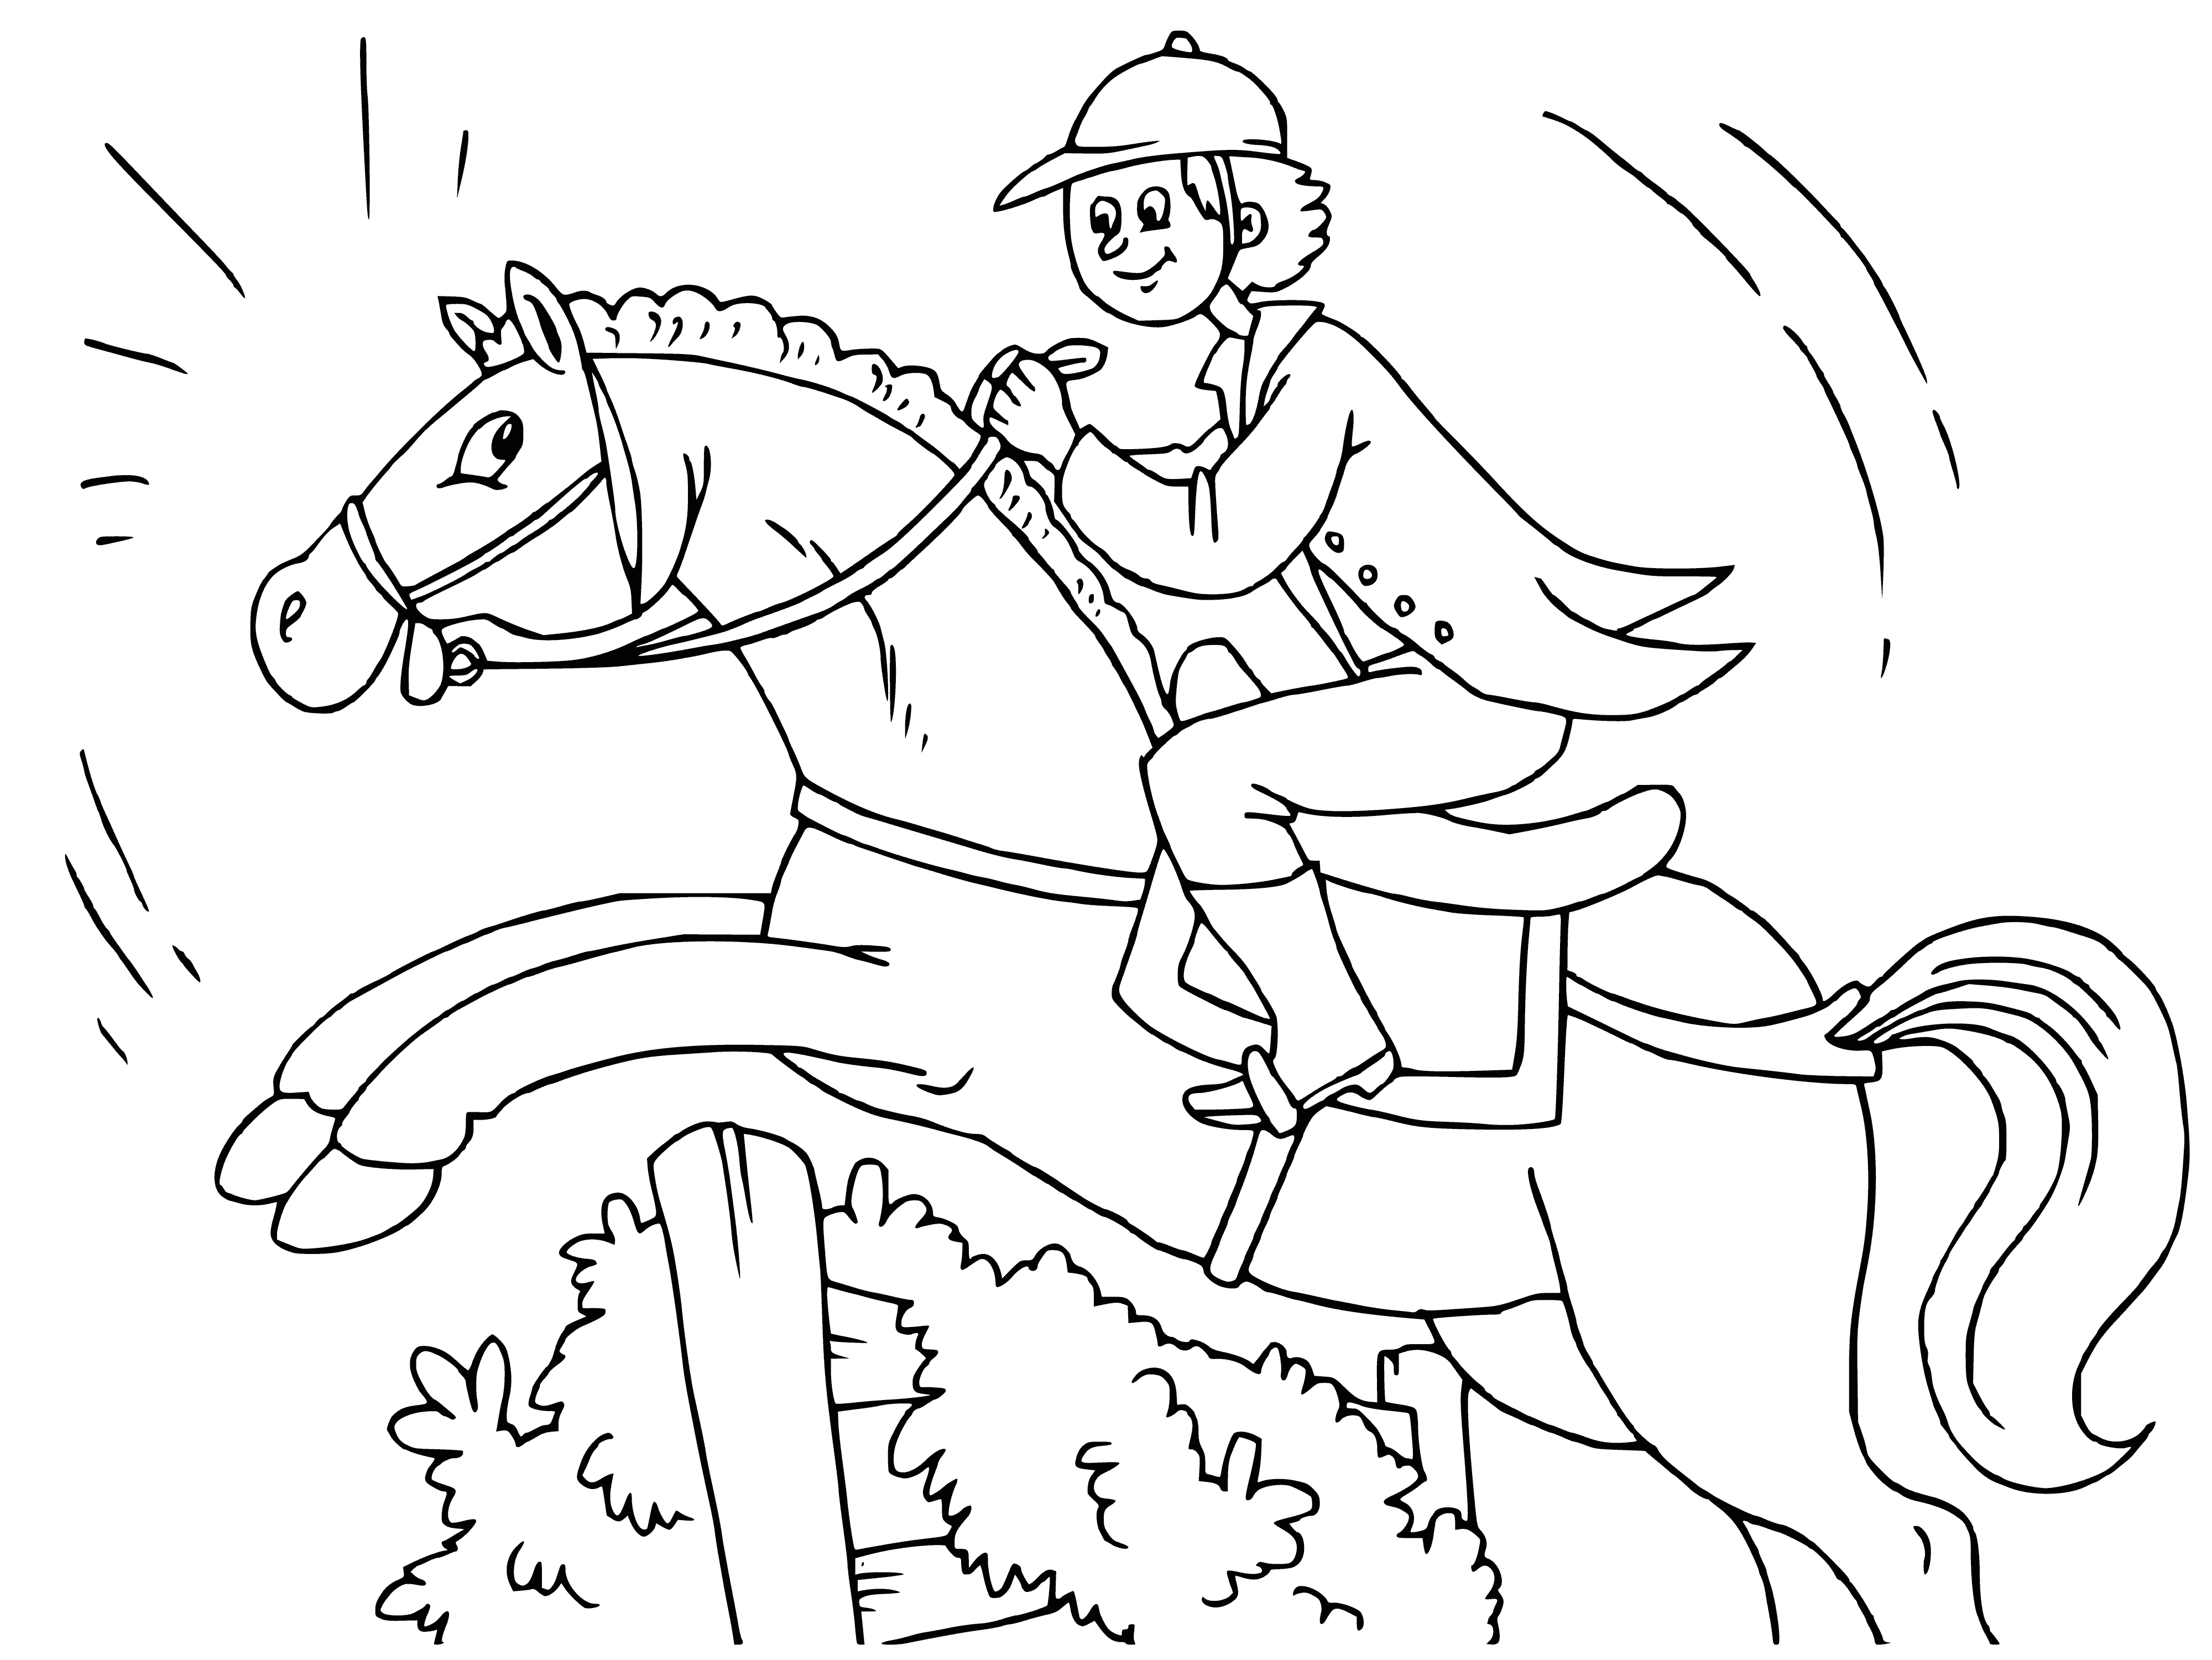 coloring page: Woman on horse in field in helmet/brown jacket; horse is brown/white.